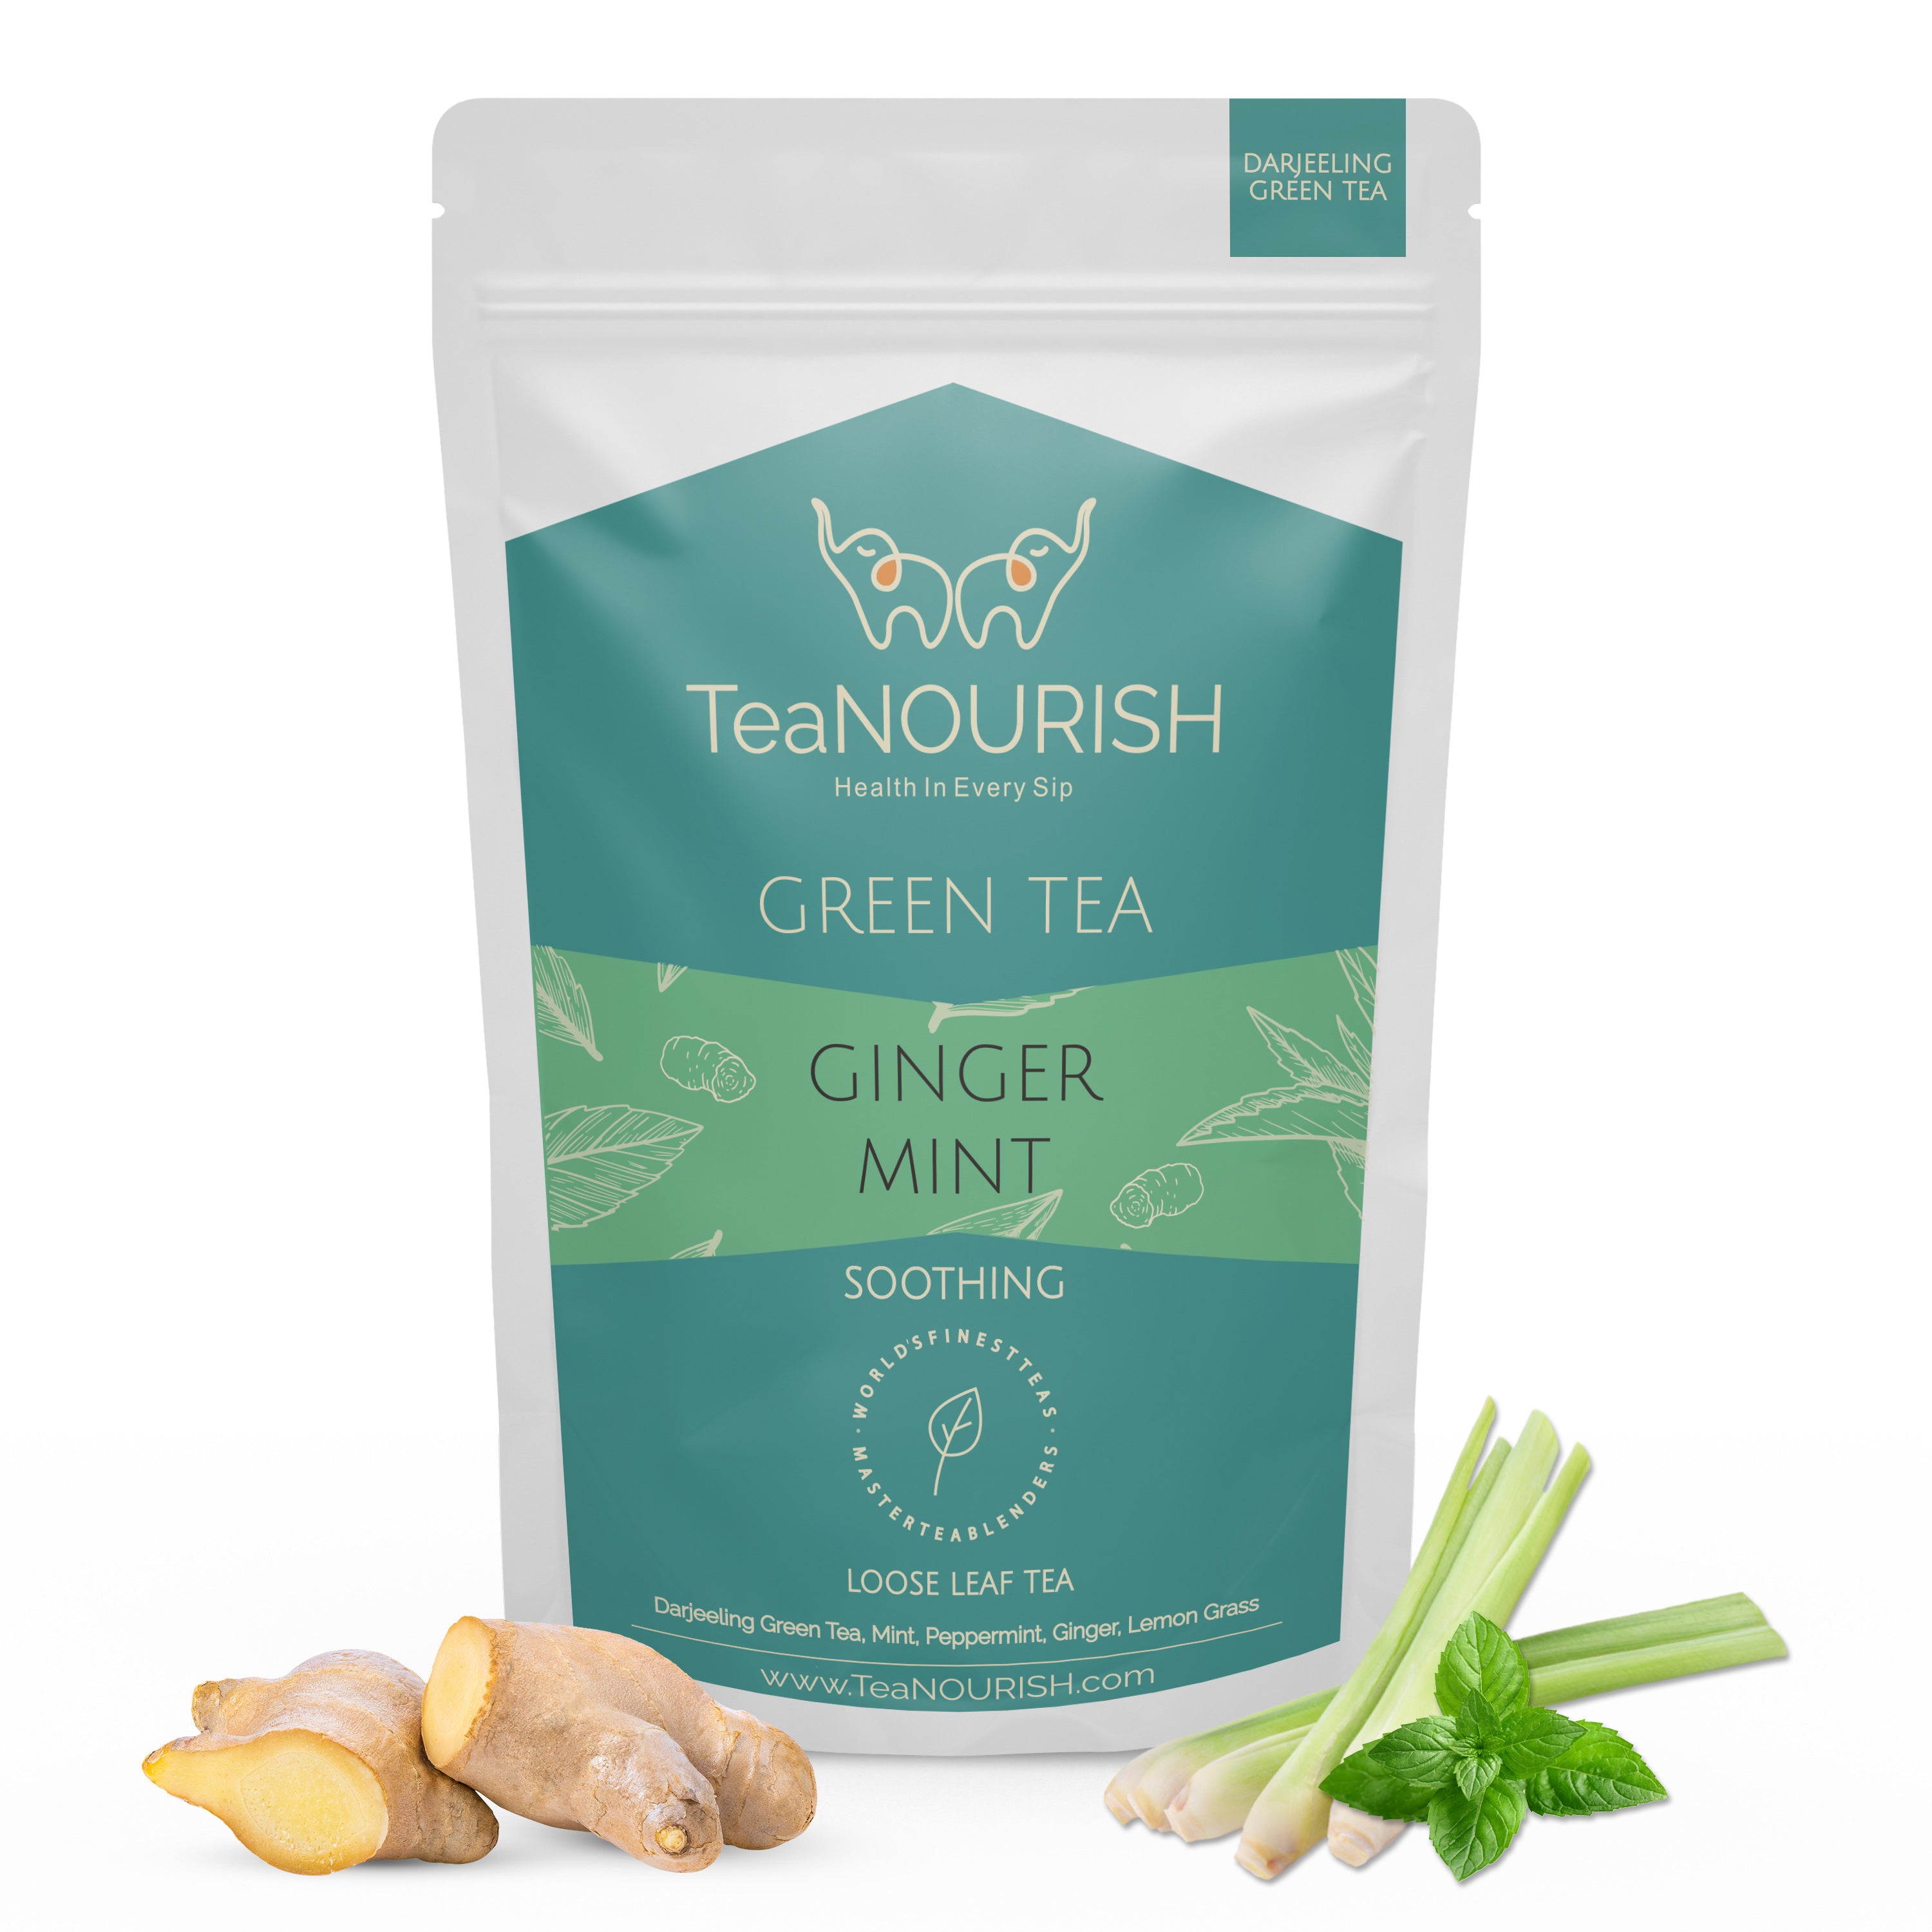 Ginger Mint Green Tea Product Picture